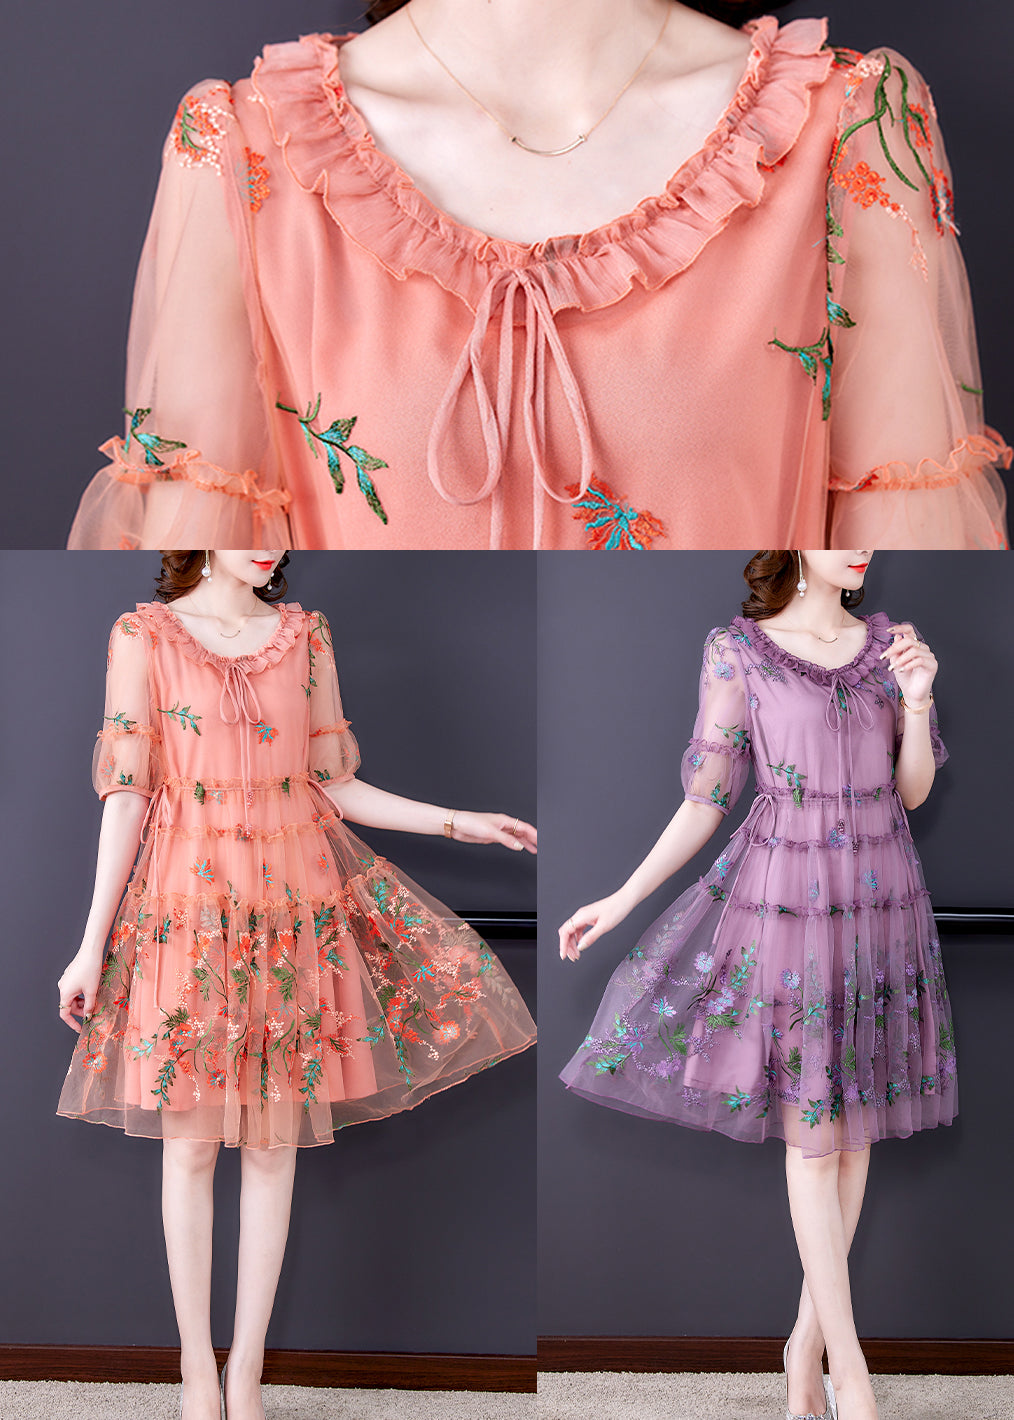 Pink Hollow Out Chiffon Holiday Dress Lace Up Embroideried Summer